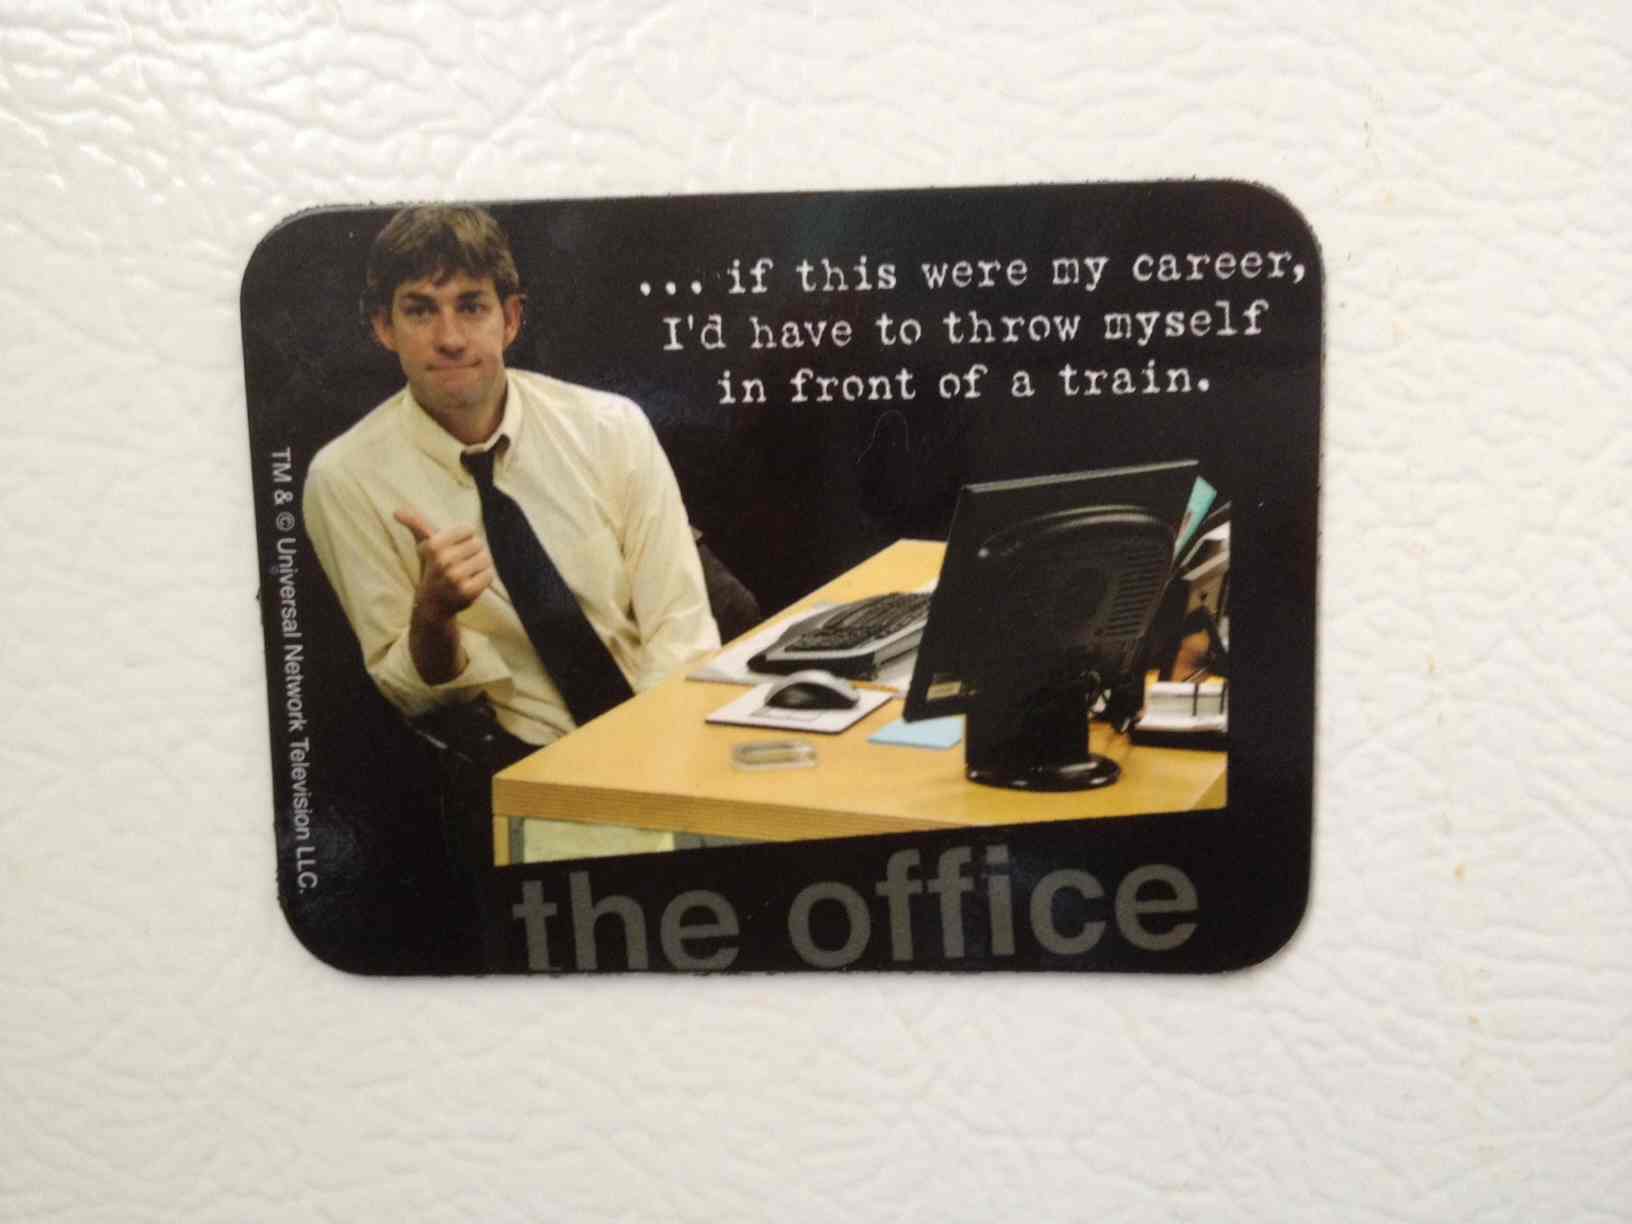 Jim from The Office Take on Career